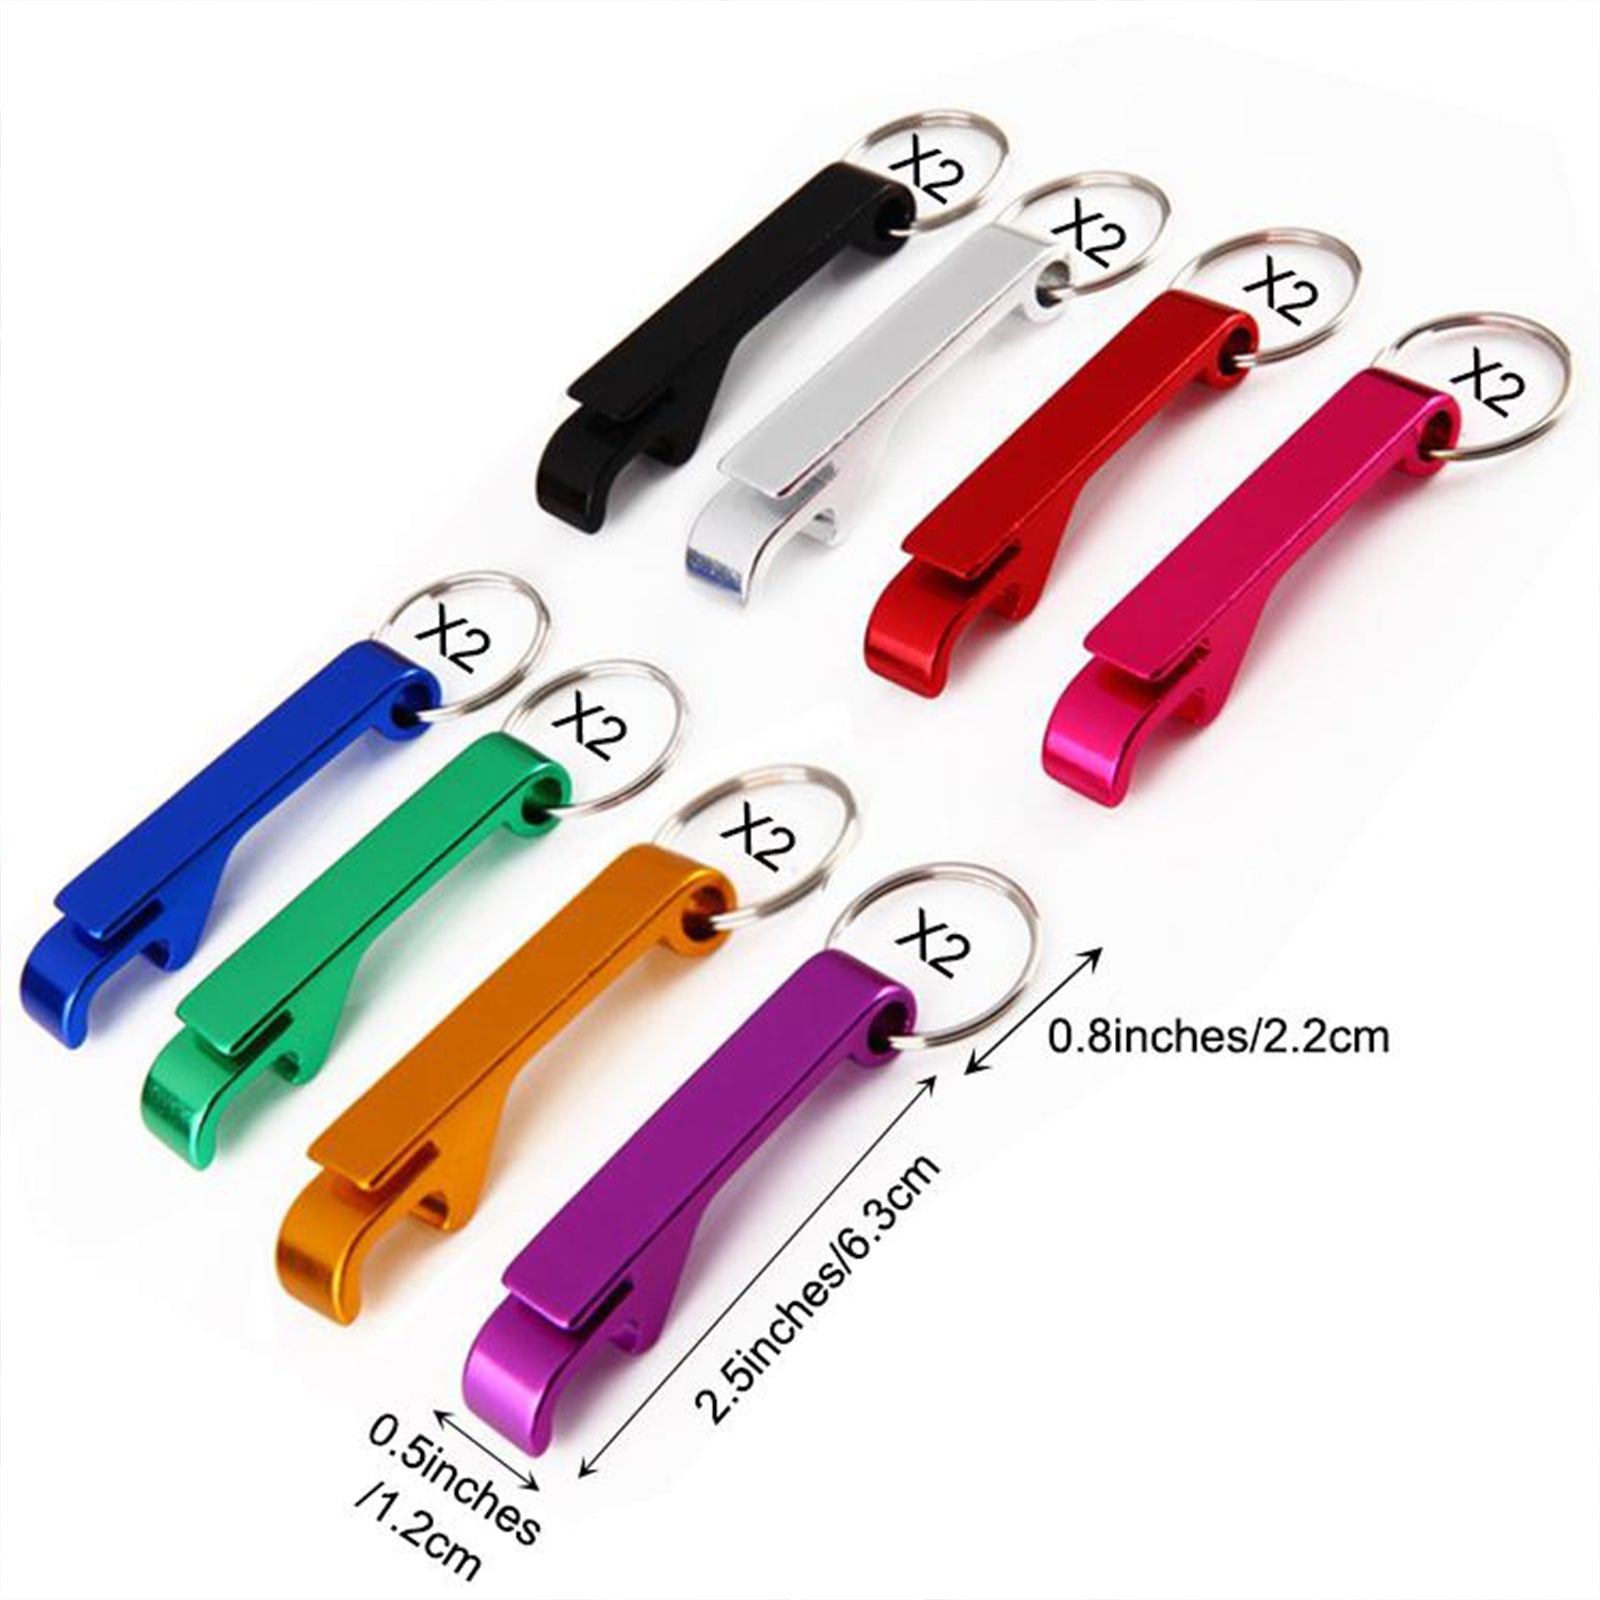 16pcs Multicolor Bottle Opener Keychain Beer Beverage Can Openers Key Chain for Men Party Favor